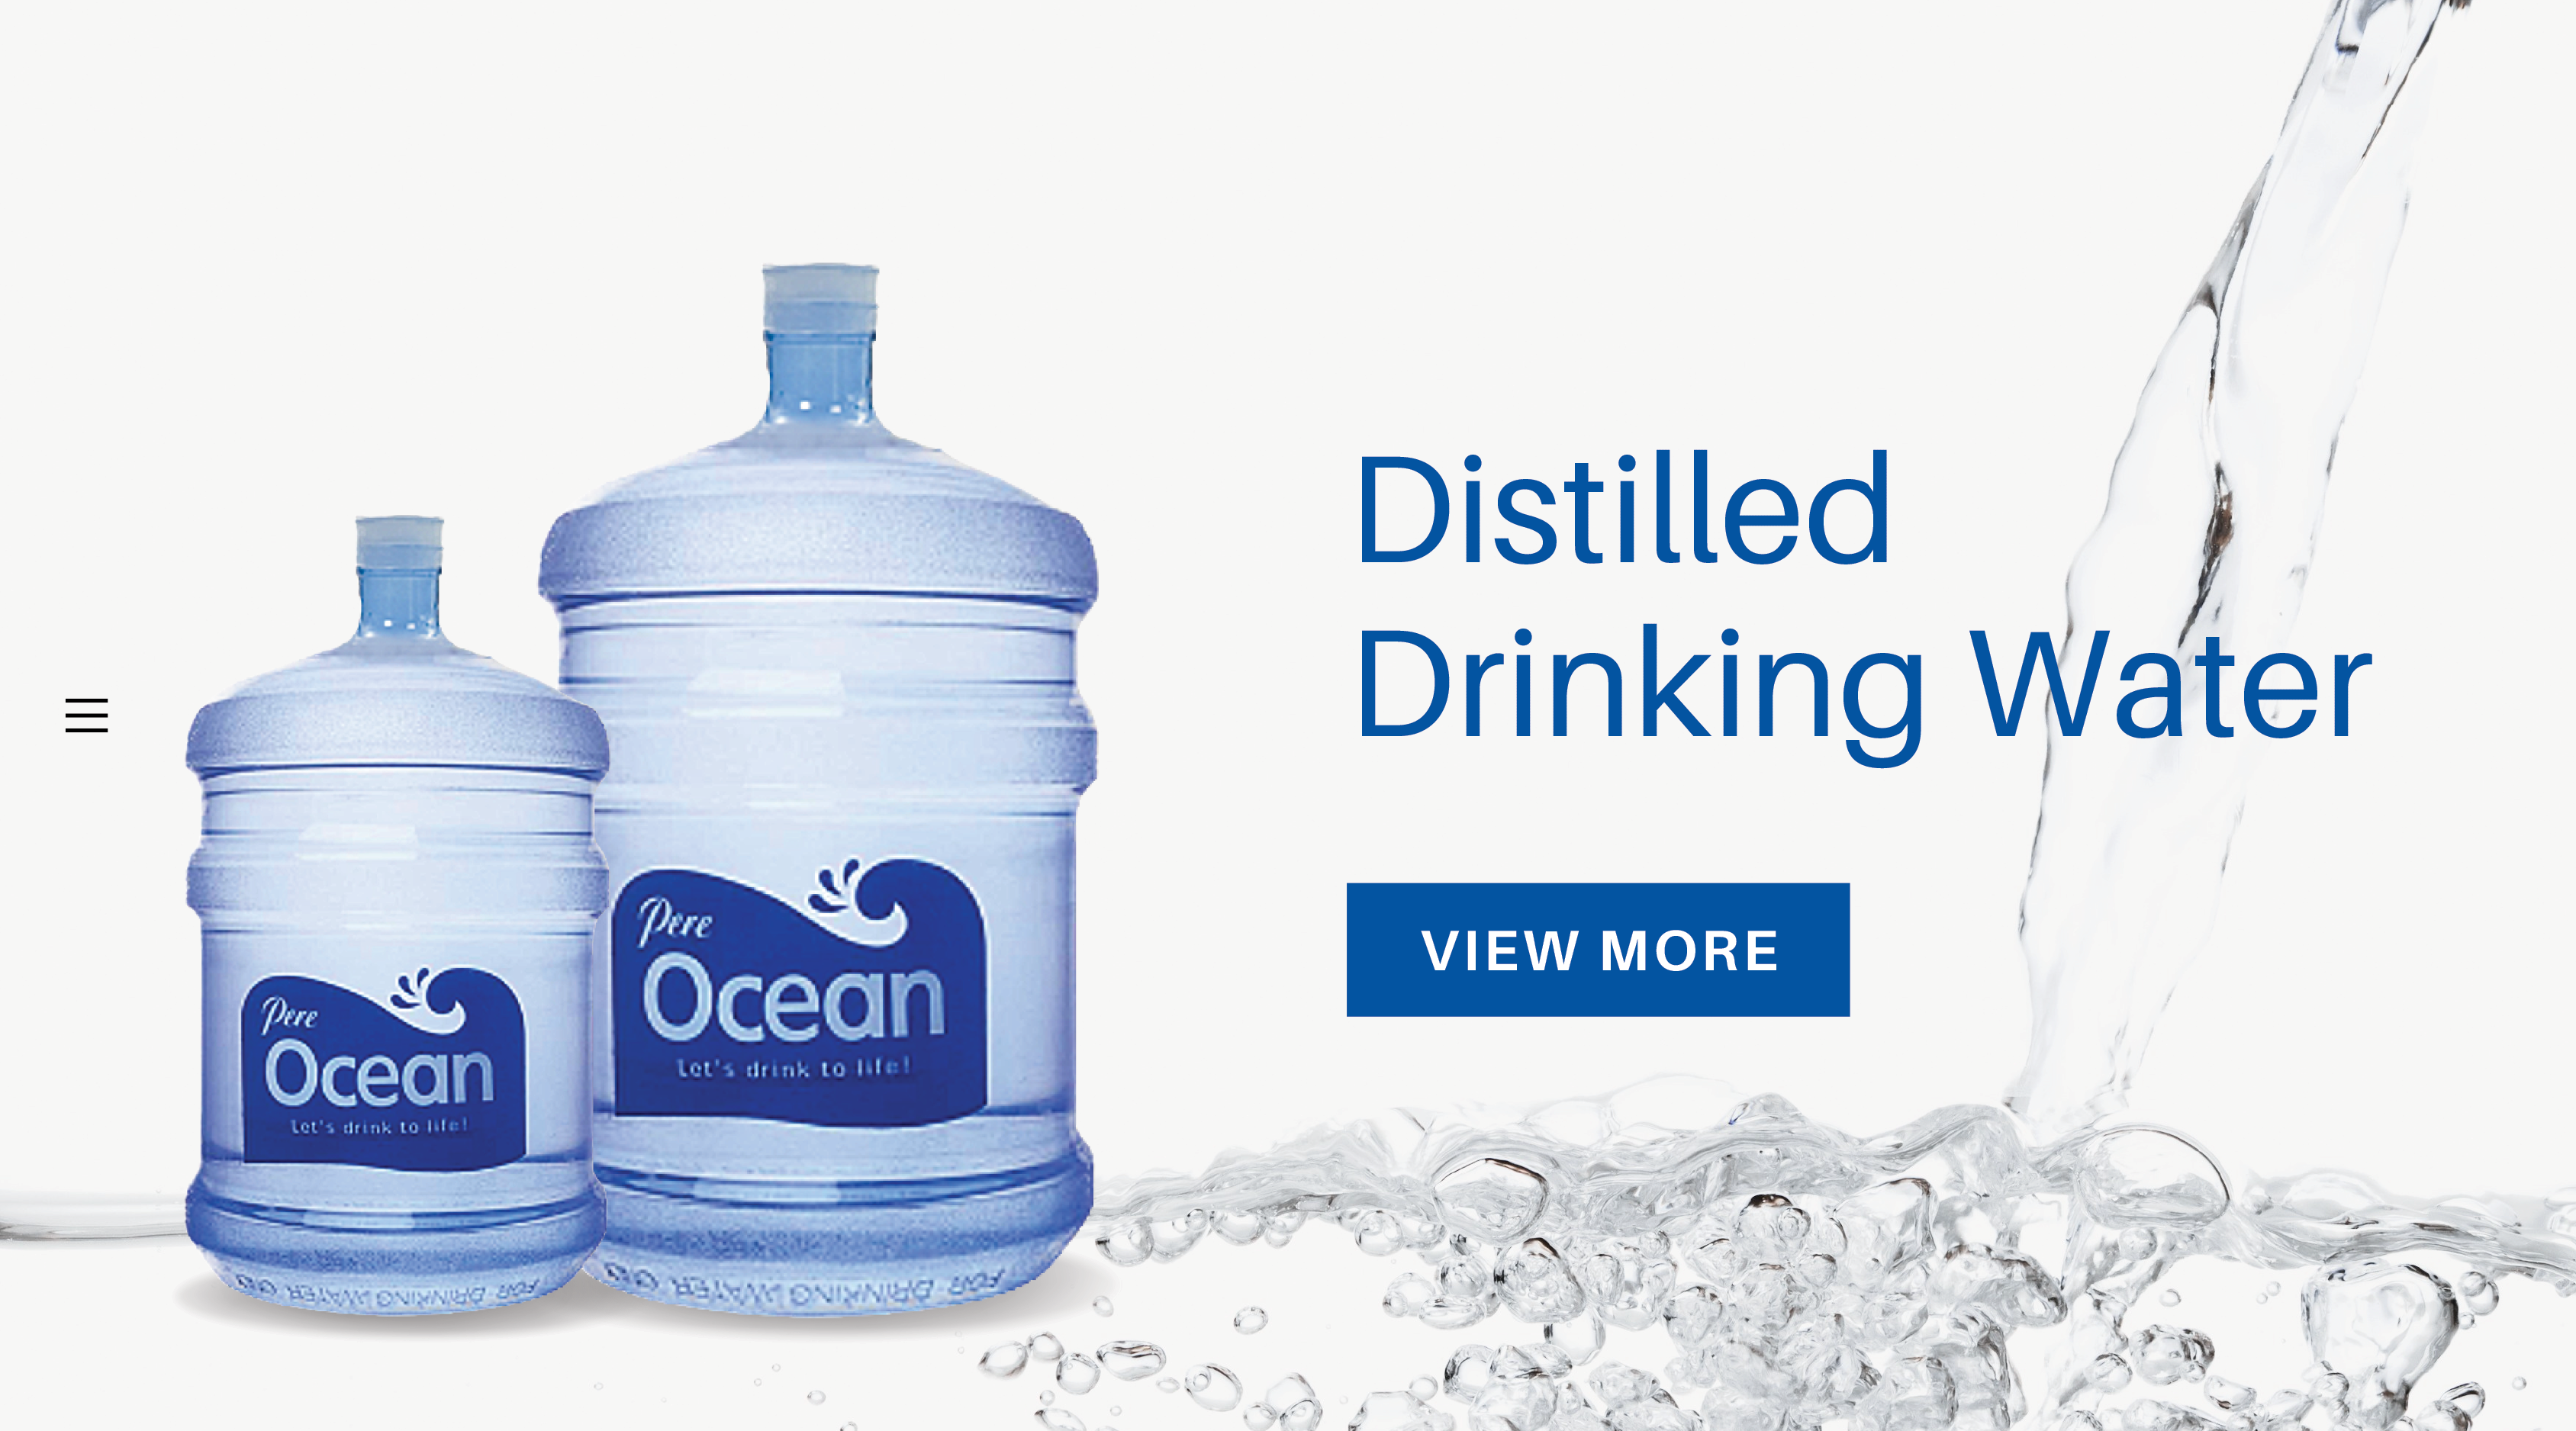 Click to view more Pere Ocean Distilled Drinking Water